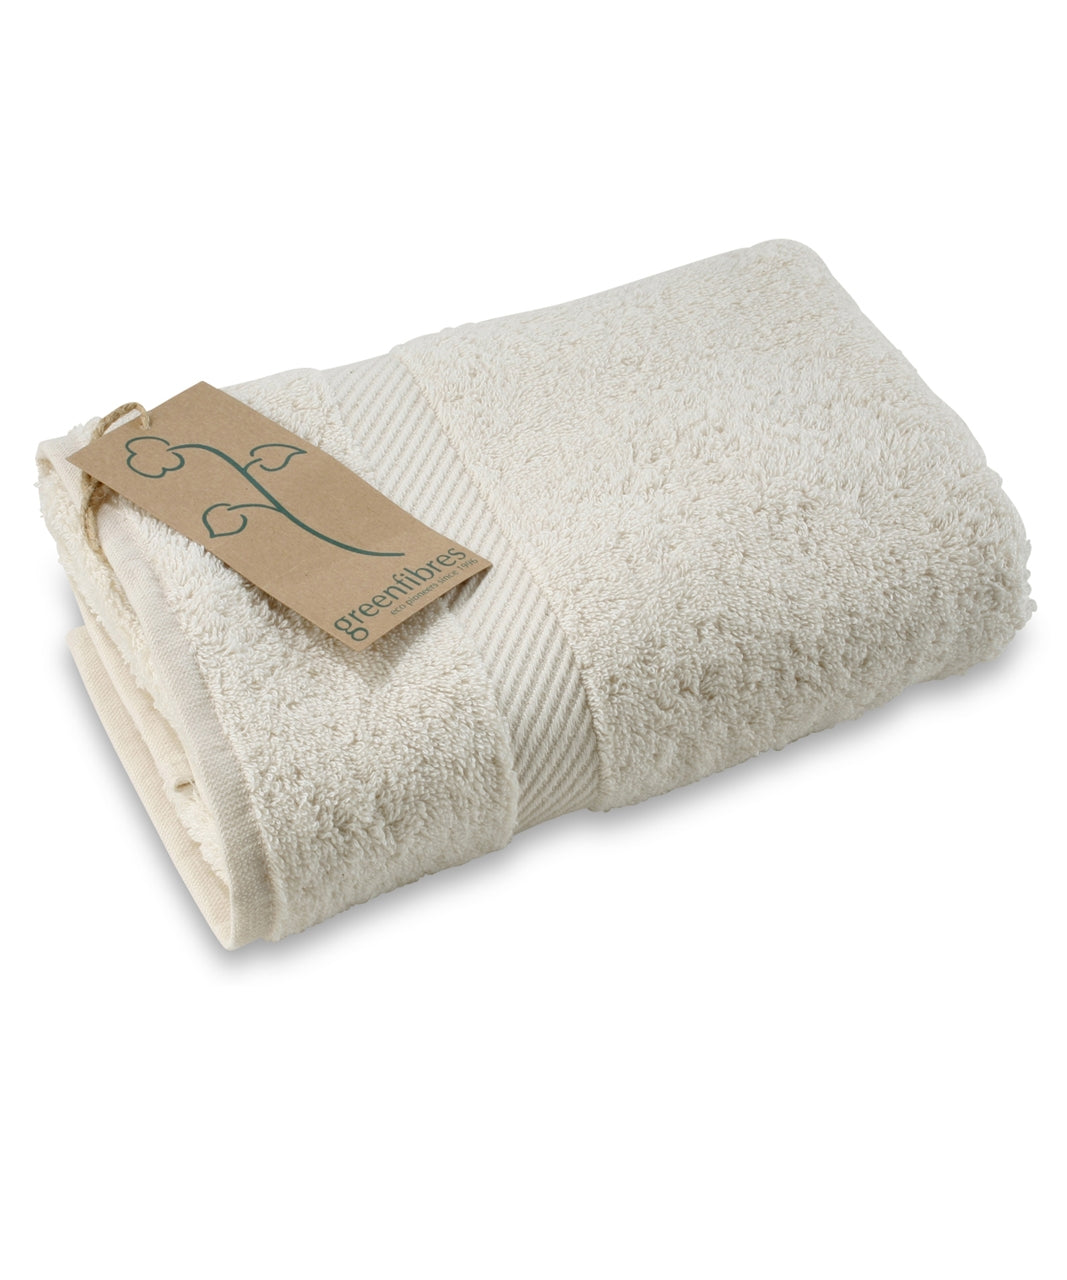 Organic Cotton Terry Hand Towel (50cm x 100cm) | Greenfibres | Raw Living UK | House &amp; Home | Bath &amp; Shower | Beauty | Greenfibres Organic Cotton Terry Hand Towel (50cm x 100cm): soft and absorbent 100% organic cotton. Undyed &amp; unbleached. Generous 600 g/m2 weight.